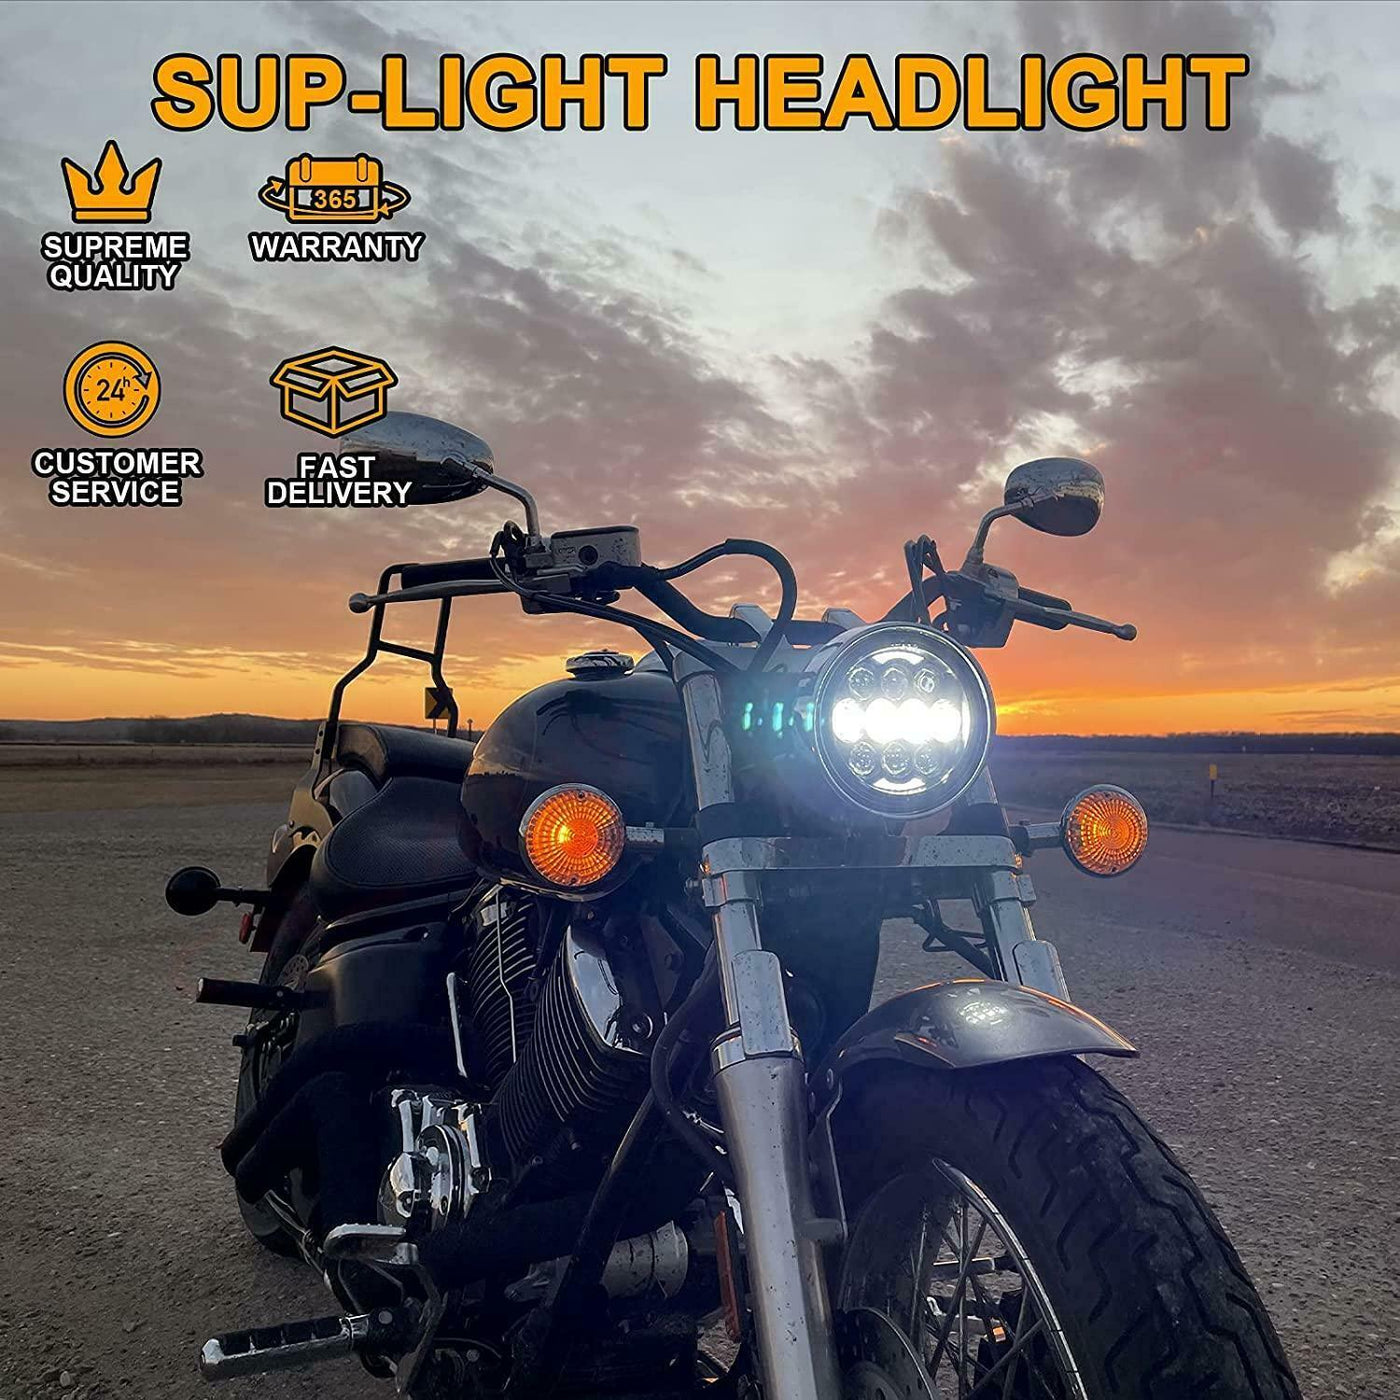 5-3/4" LED 5.75" Headlight Turn Signal For Harley Davidson Sportster XL 1200 883 - Moto Life Products